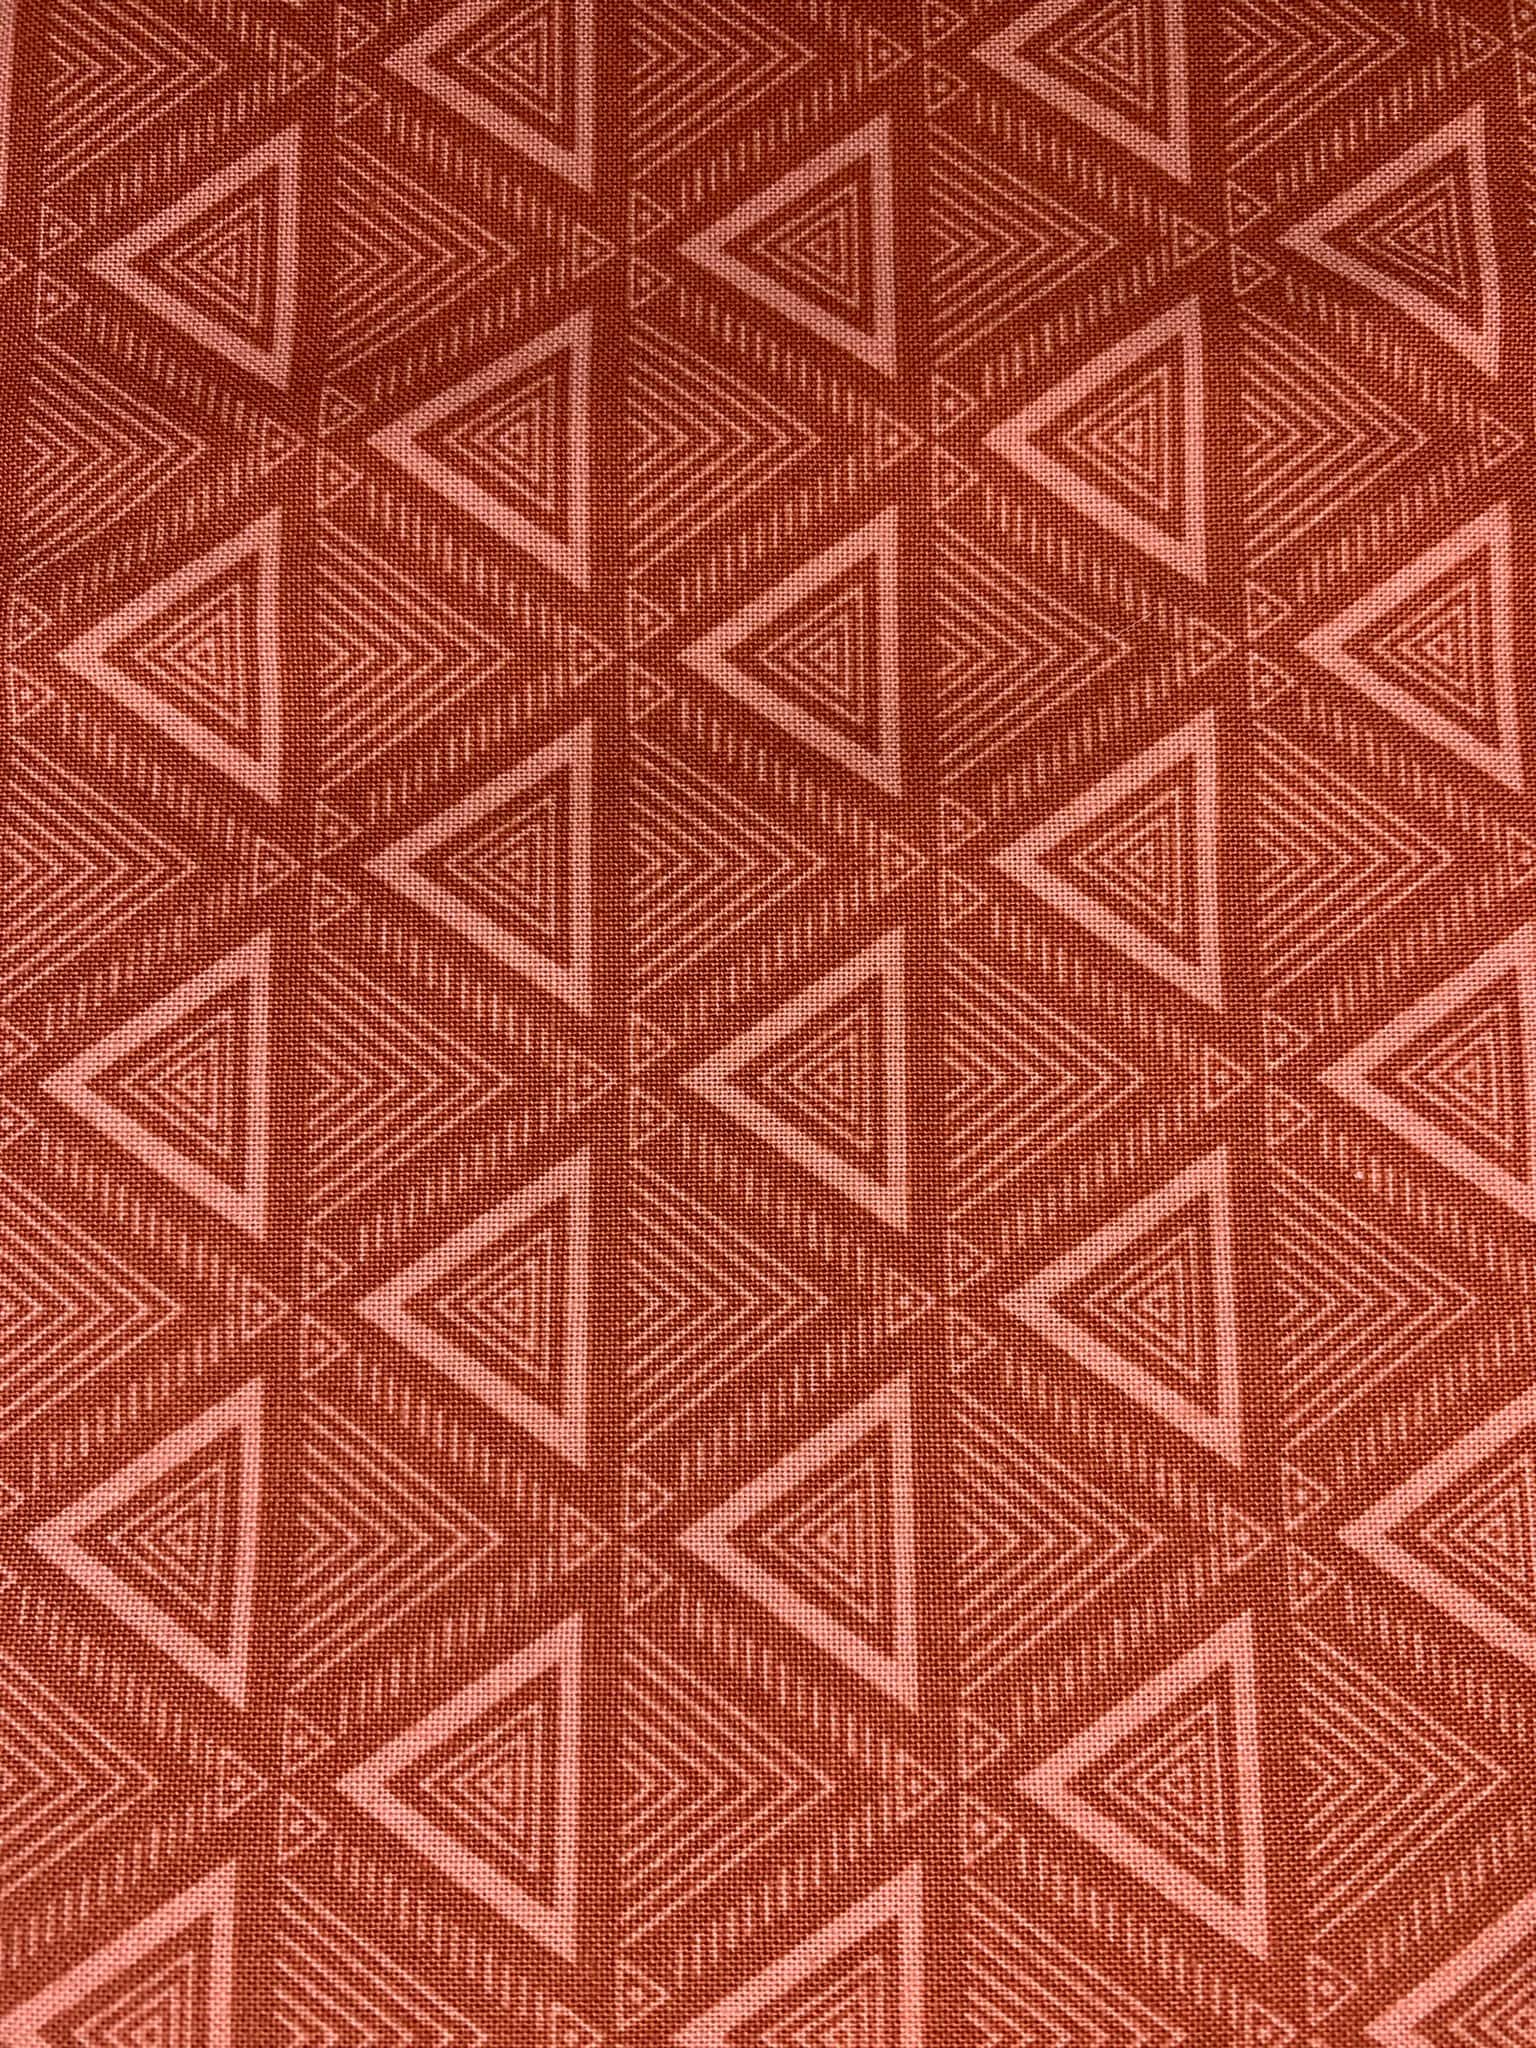 High Quality Quilting Fabric-- Hand Cut -Sold by the 1/2 Yard- Michael Miller Fabrics-100% Cotton Fabric. Color: Clay-Sold by the 1/2 Yard-